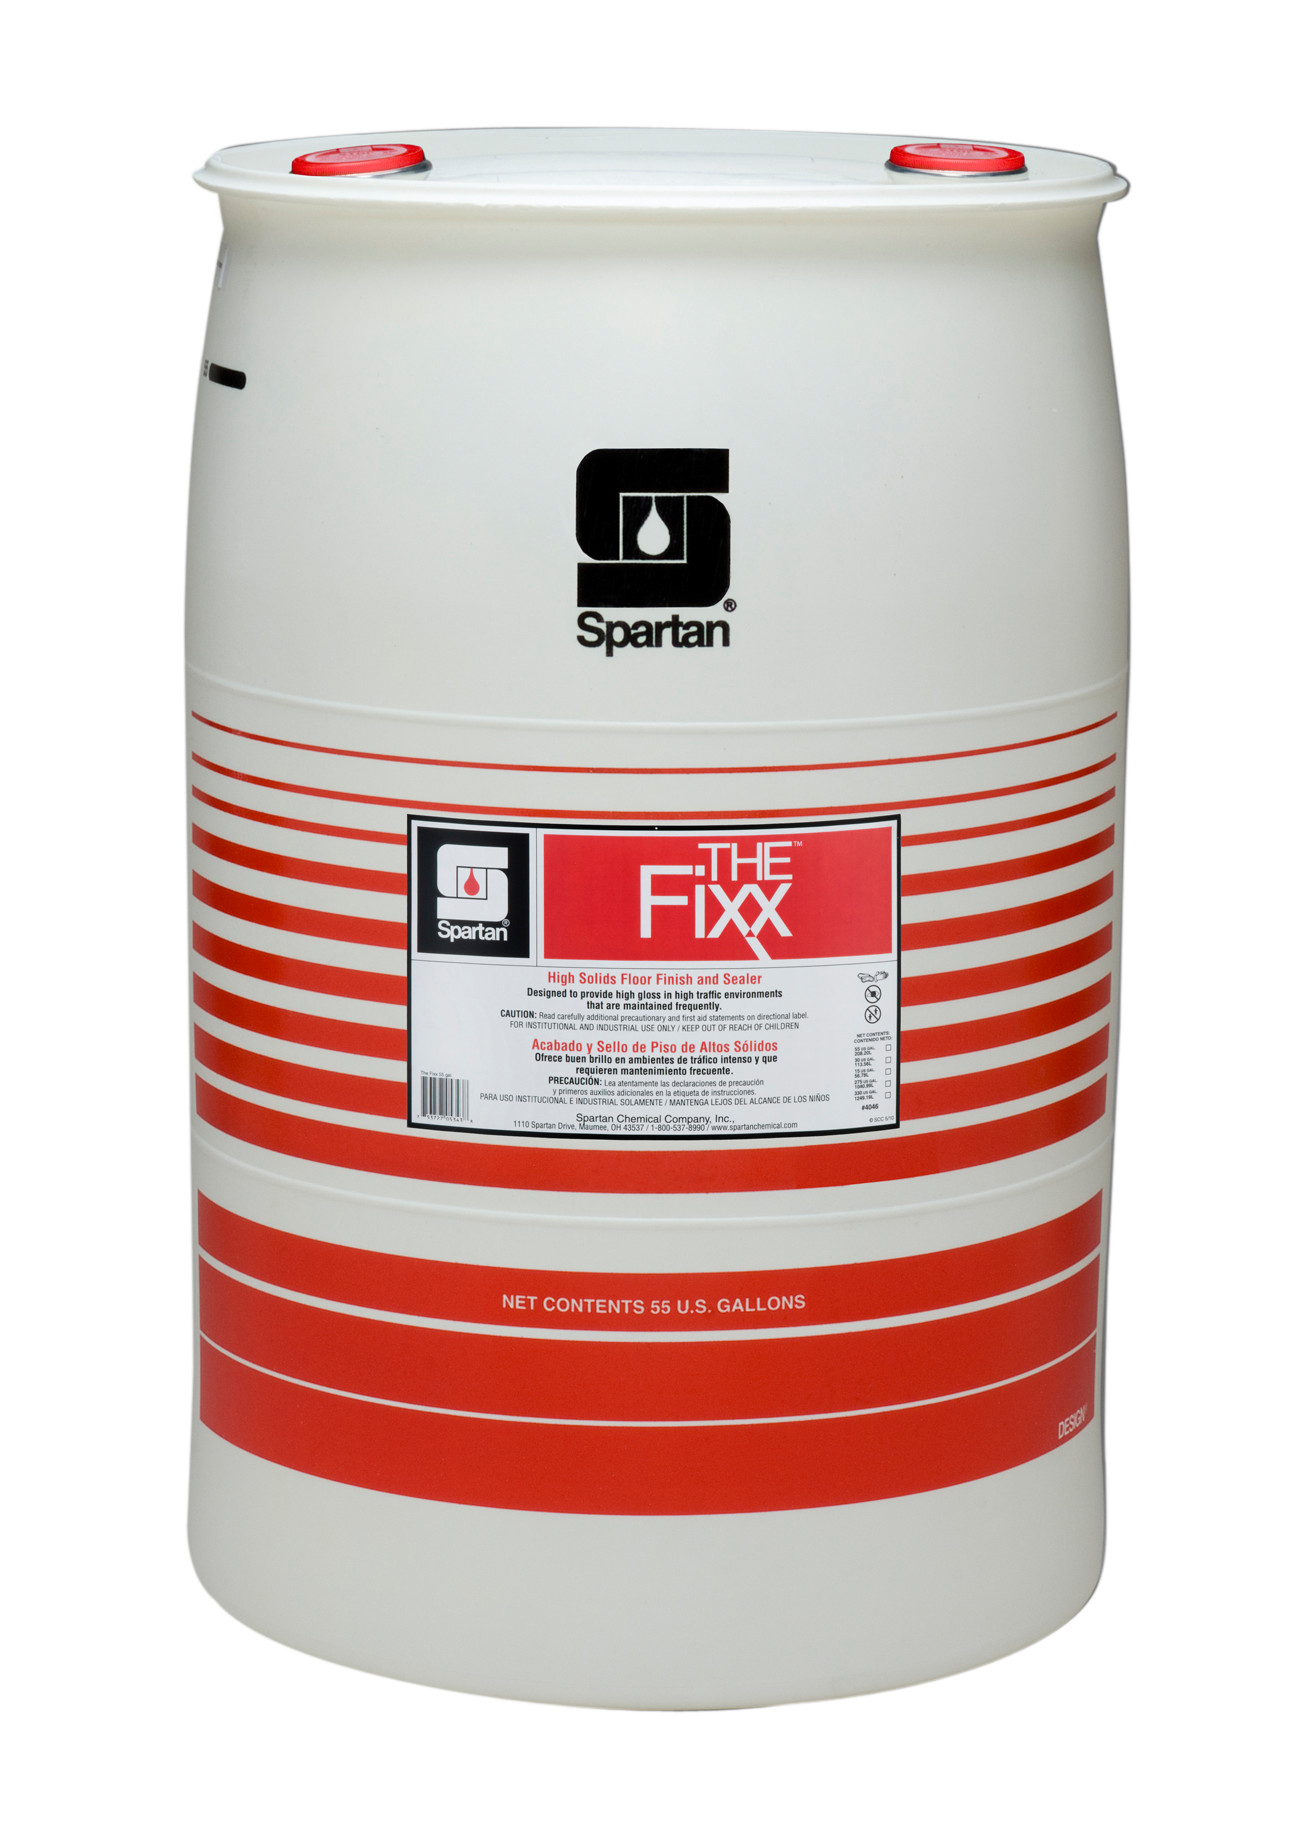 Spartan Chemical Company The Fixx, 55 GAL DRUM